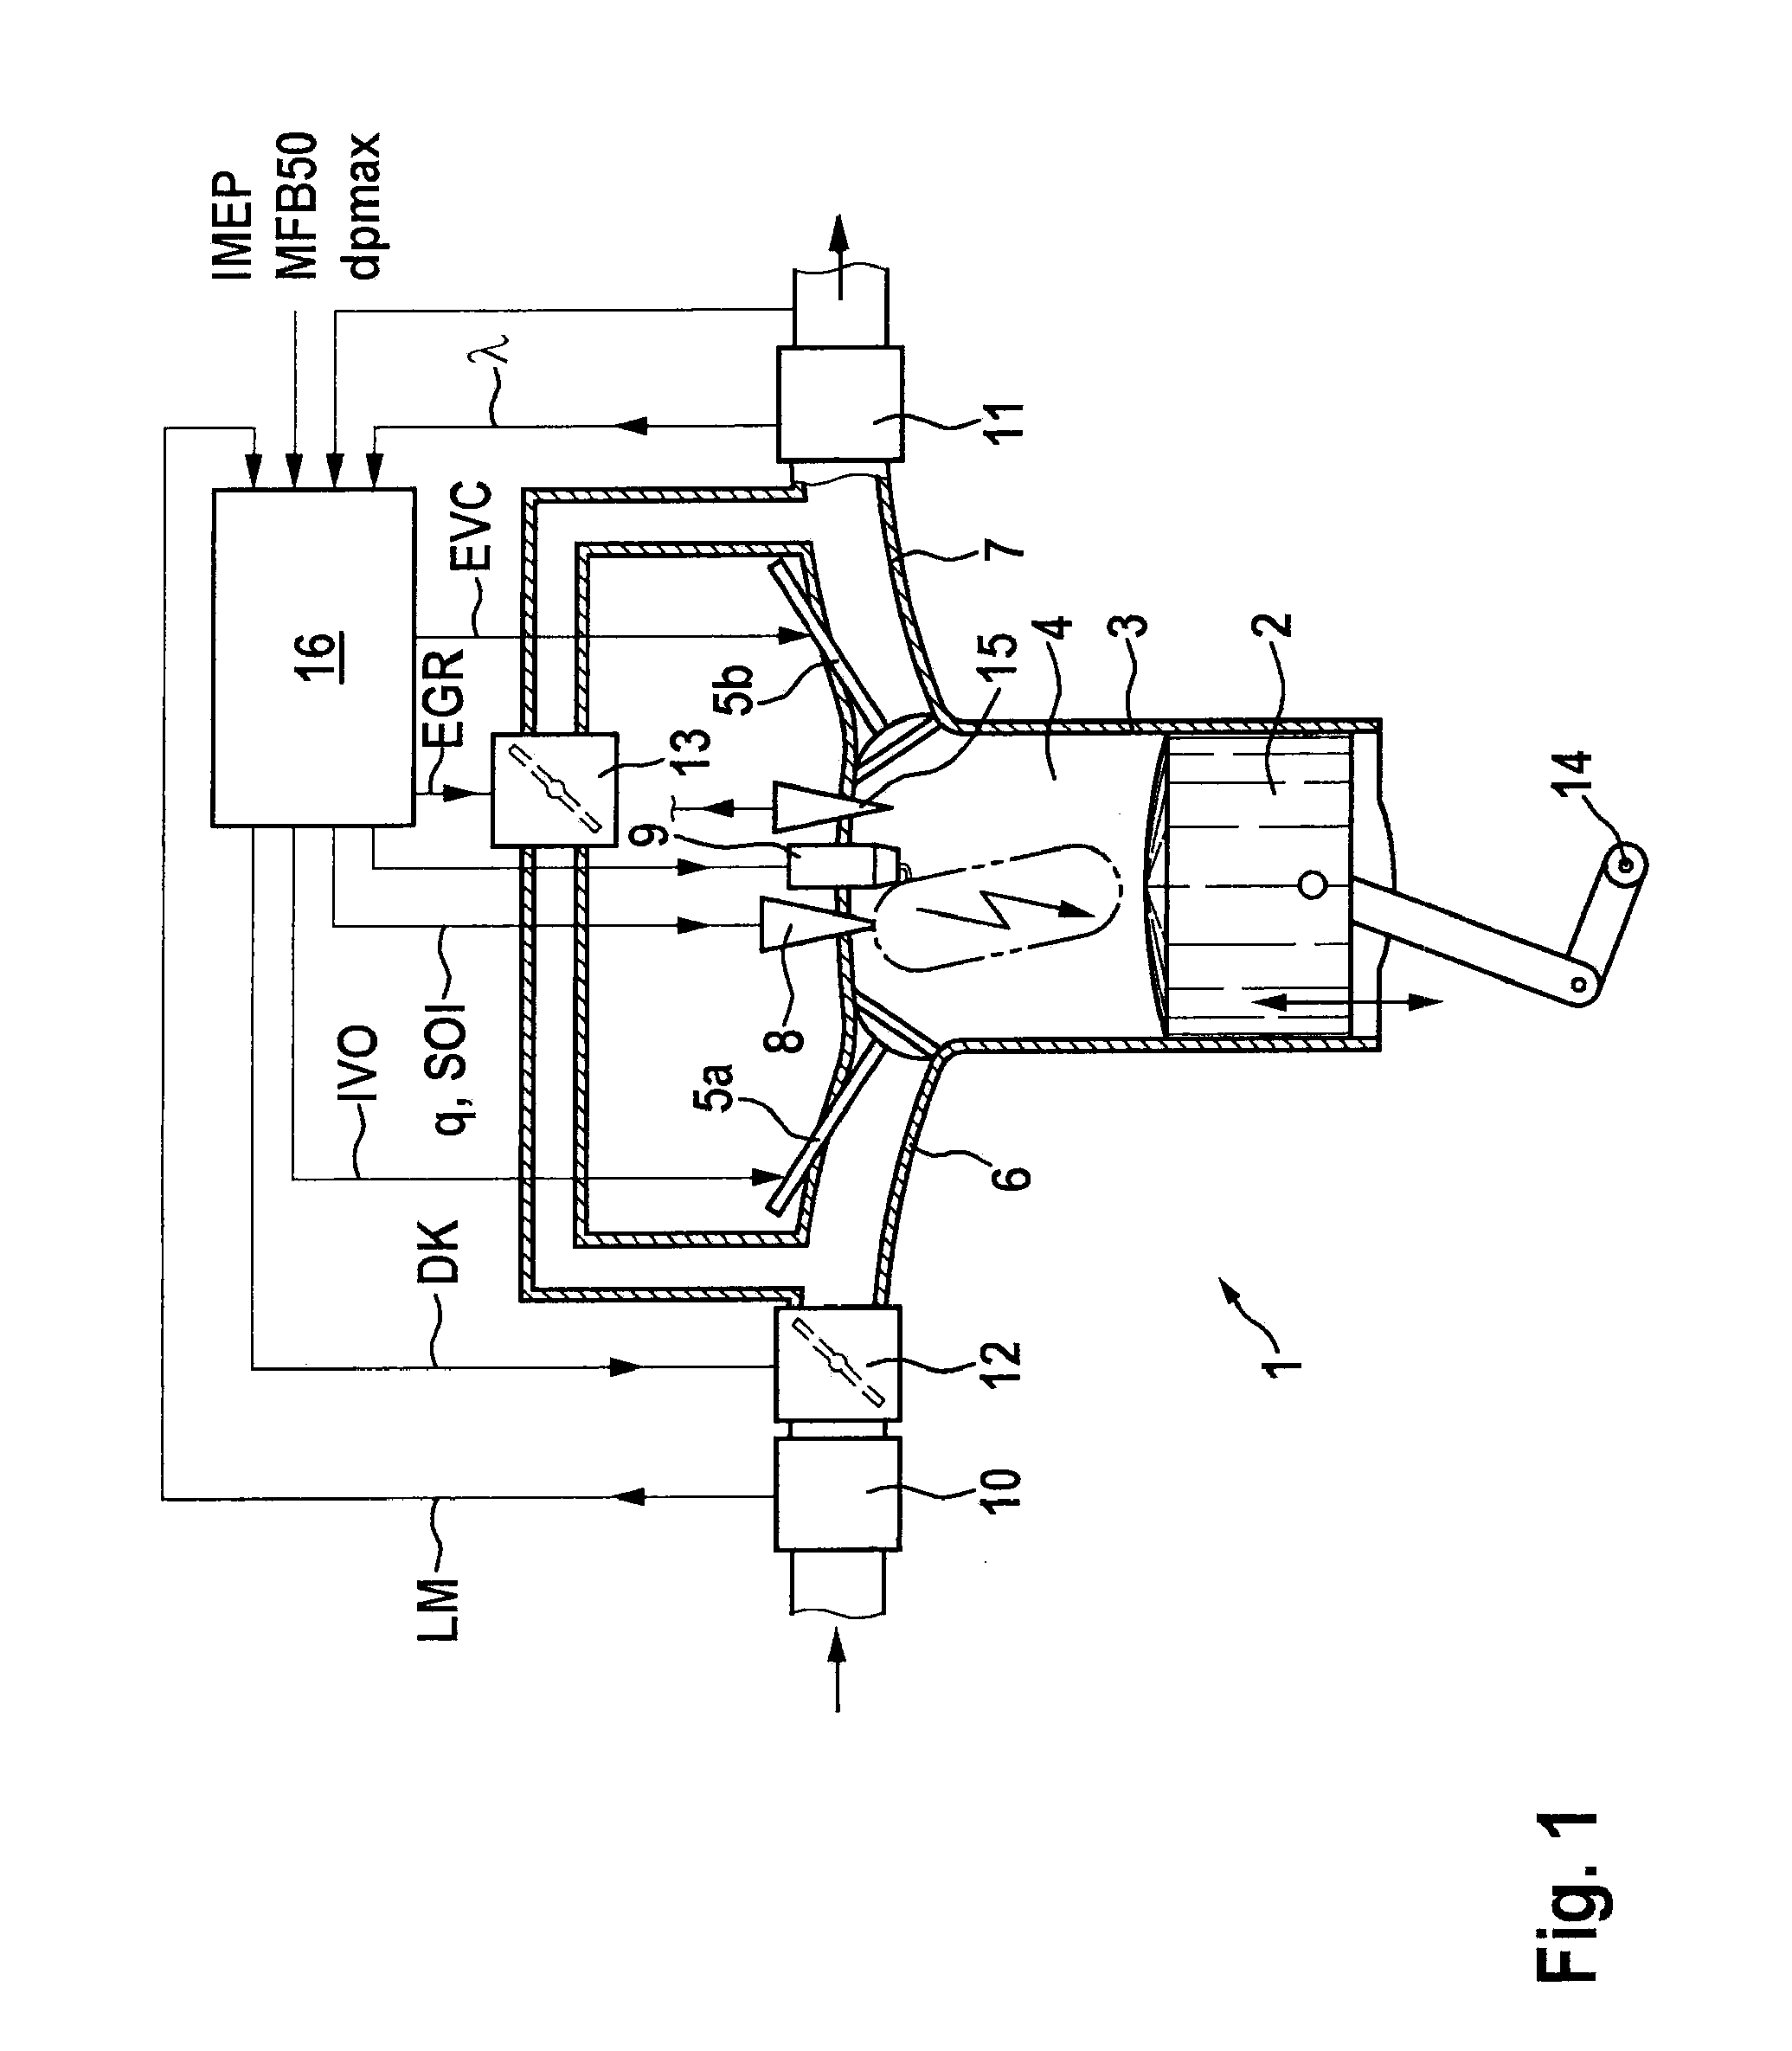 Method for regulating HCCI combustion in a reactor of an internal combustion engine